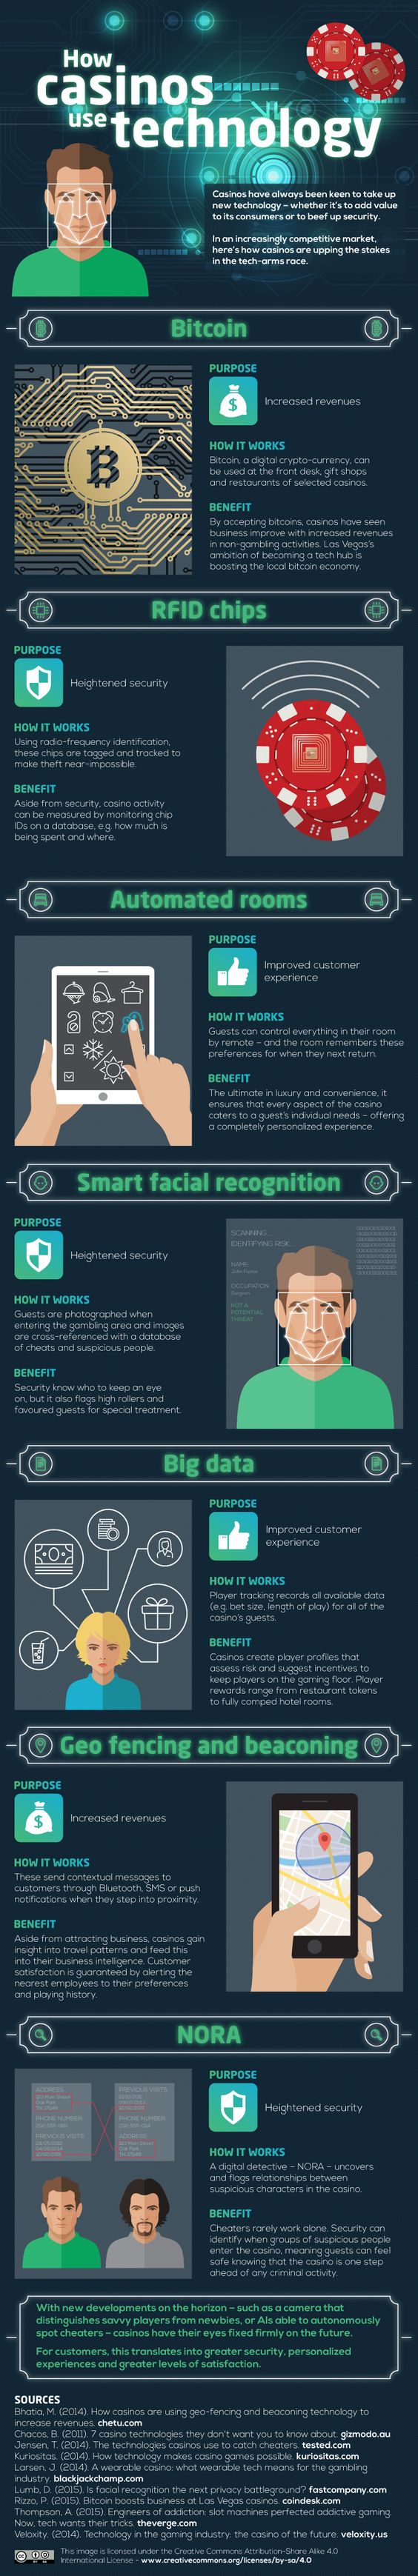 How Casinos Use Technology Infographic